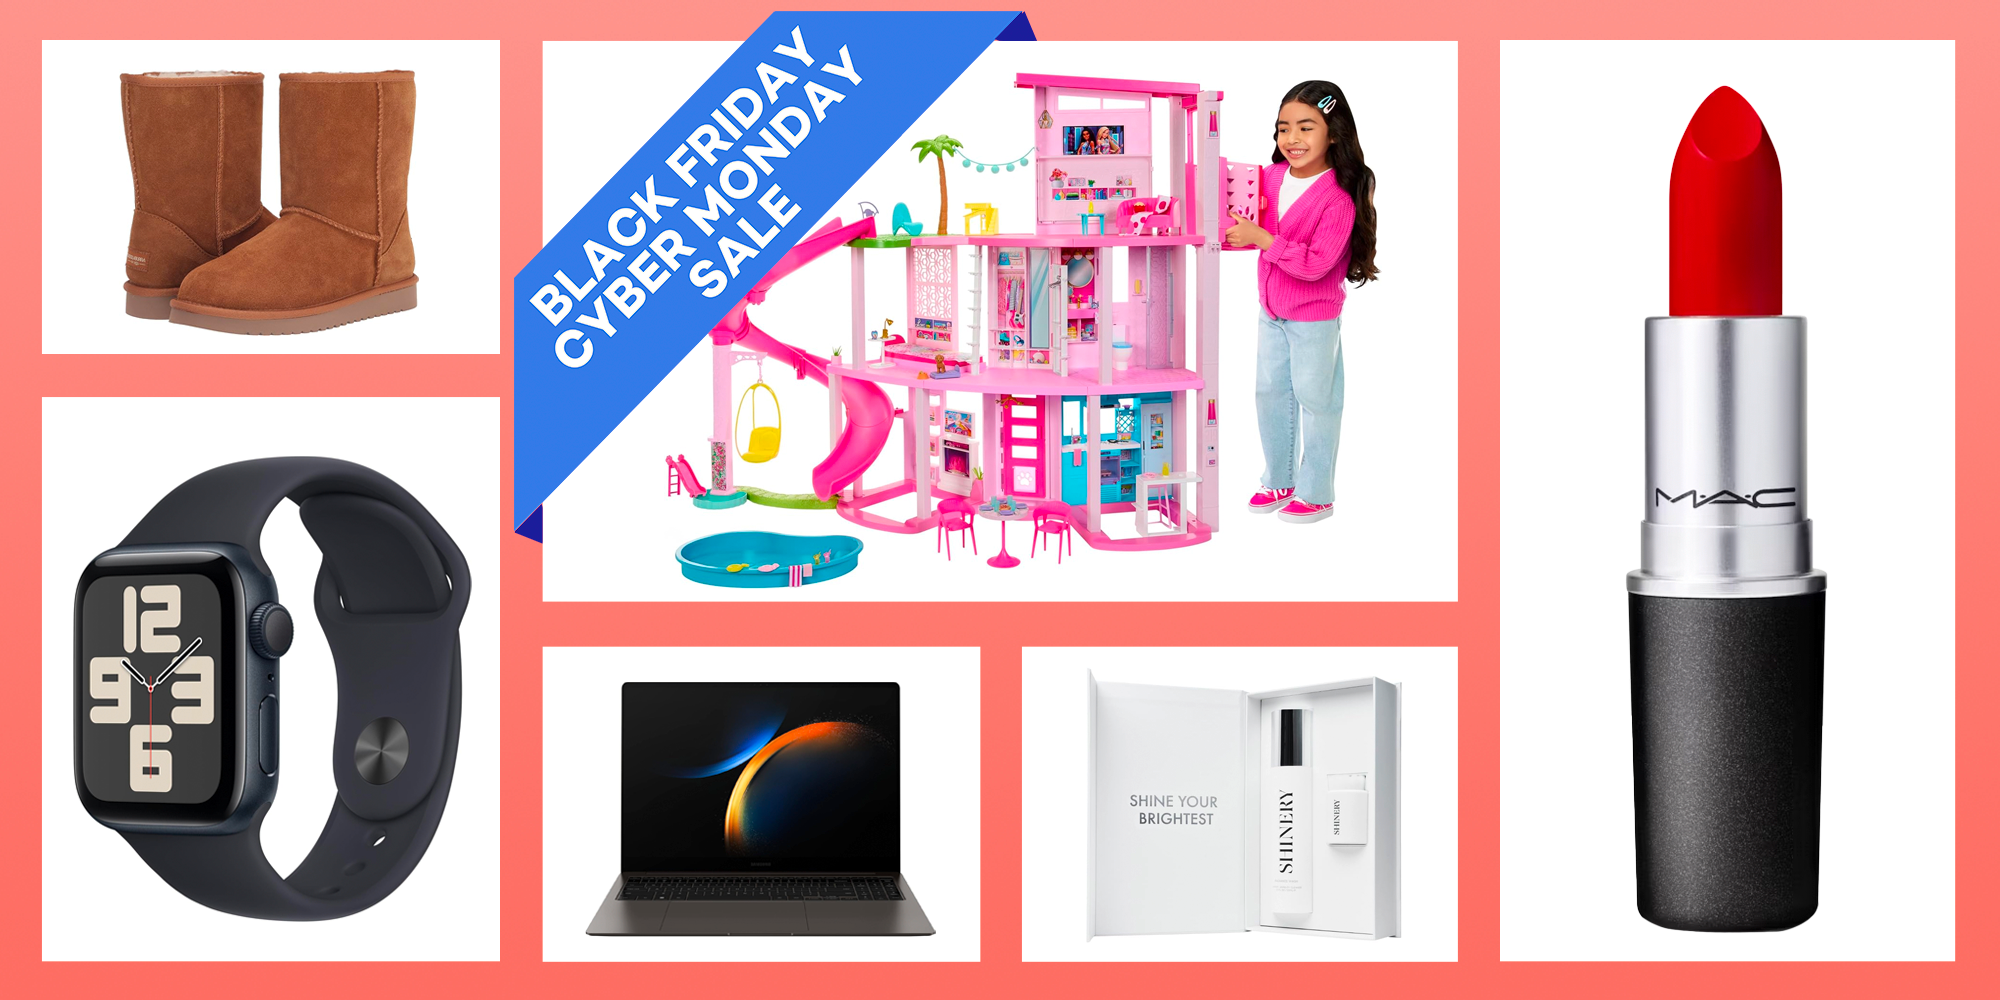 Promotions - Cyber Monday Cyber Sale - Gifts $300 - $400 - The